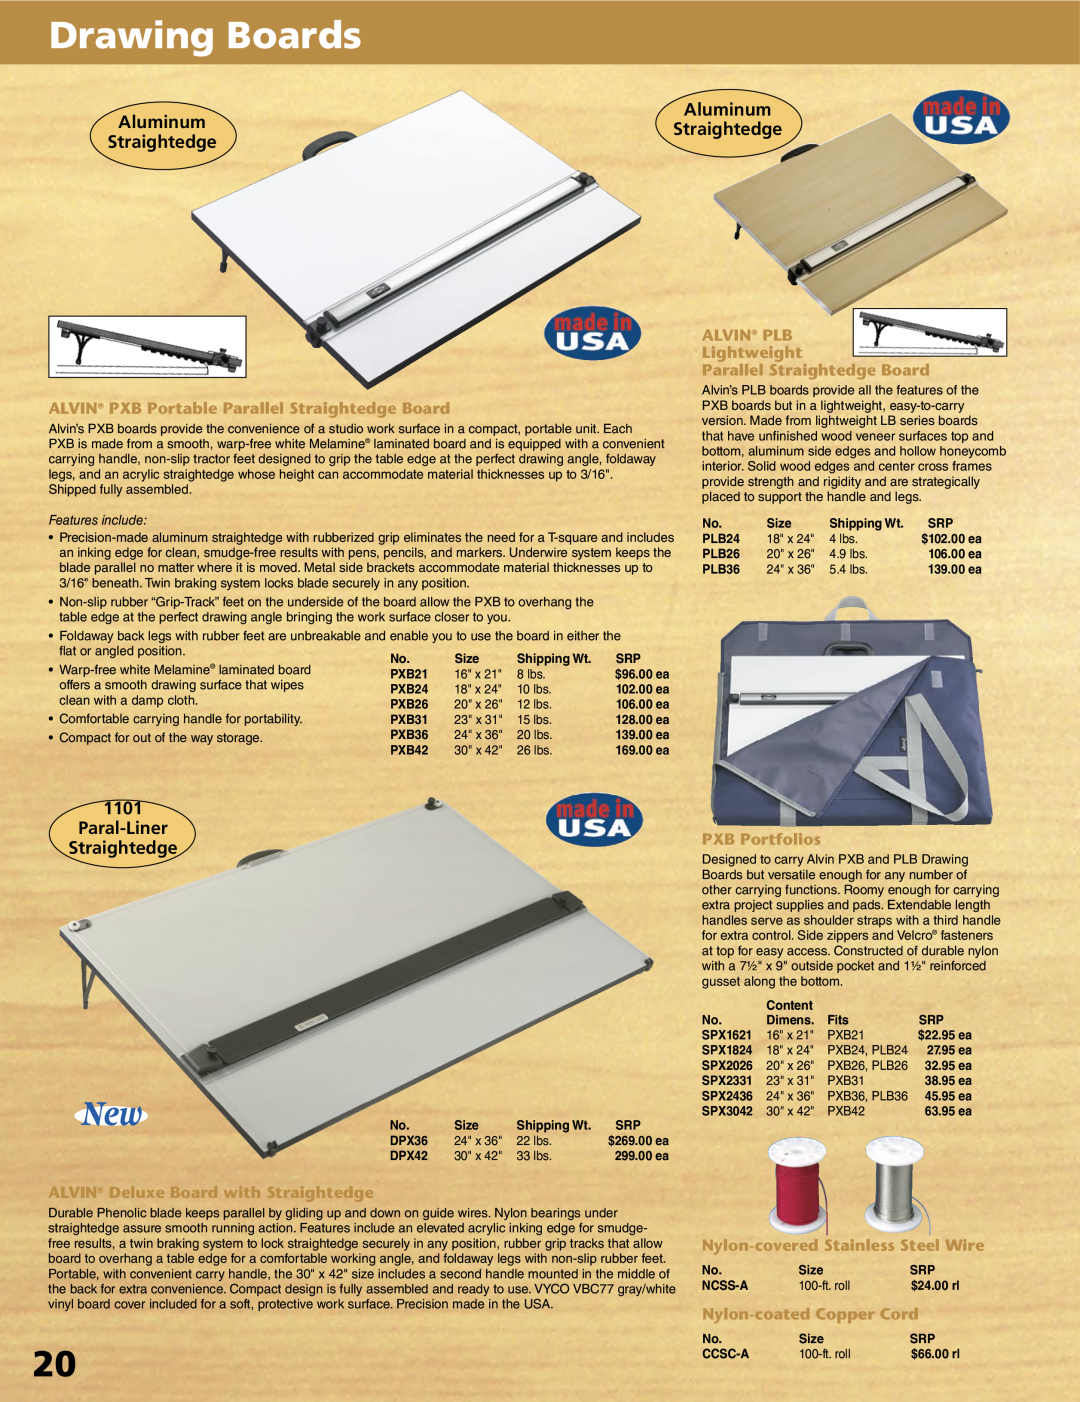 Alvin XX-4-XB manual Drawing Boards, Aluminum AluminumStraightedge Straightedge, Paral-Liner Straightedge, PXB Portfolios 